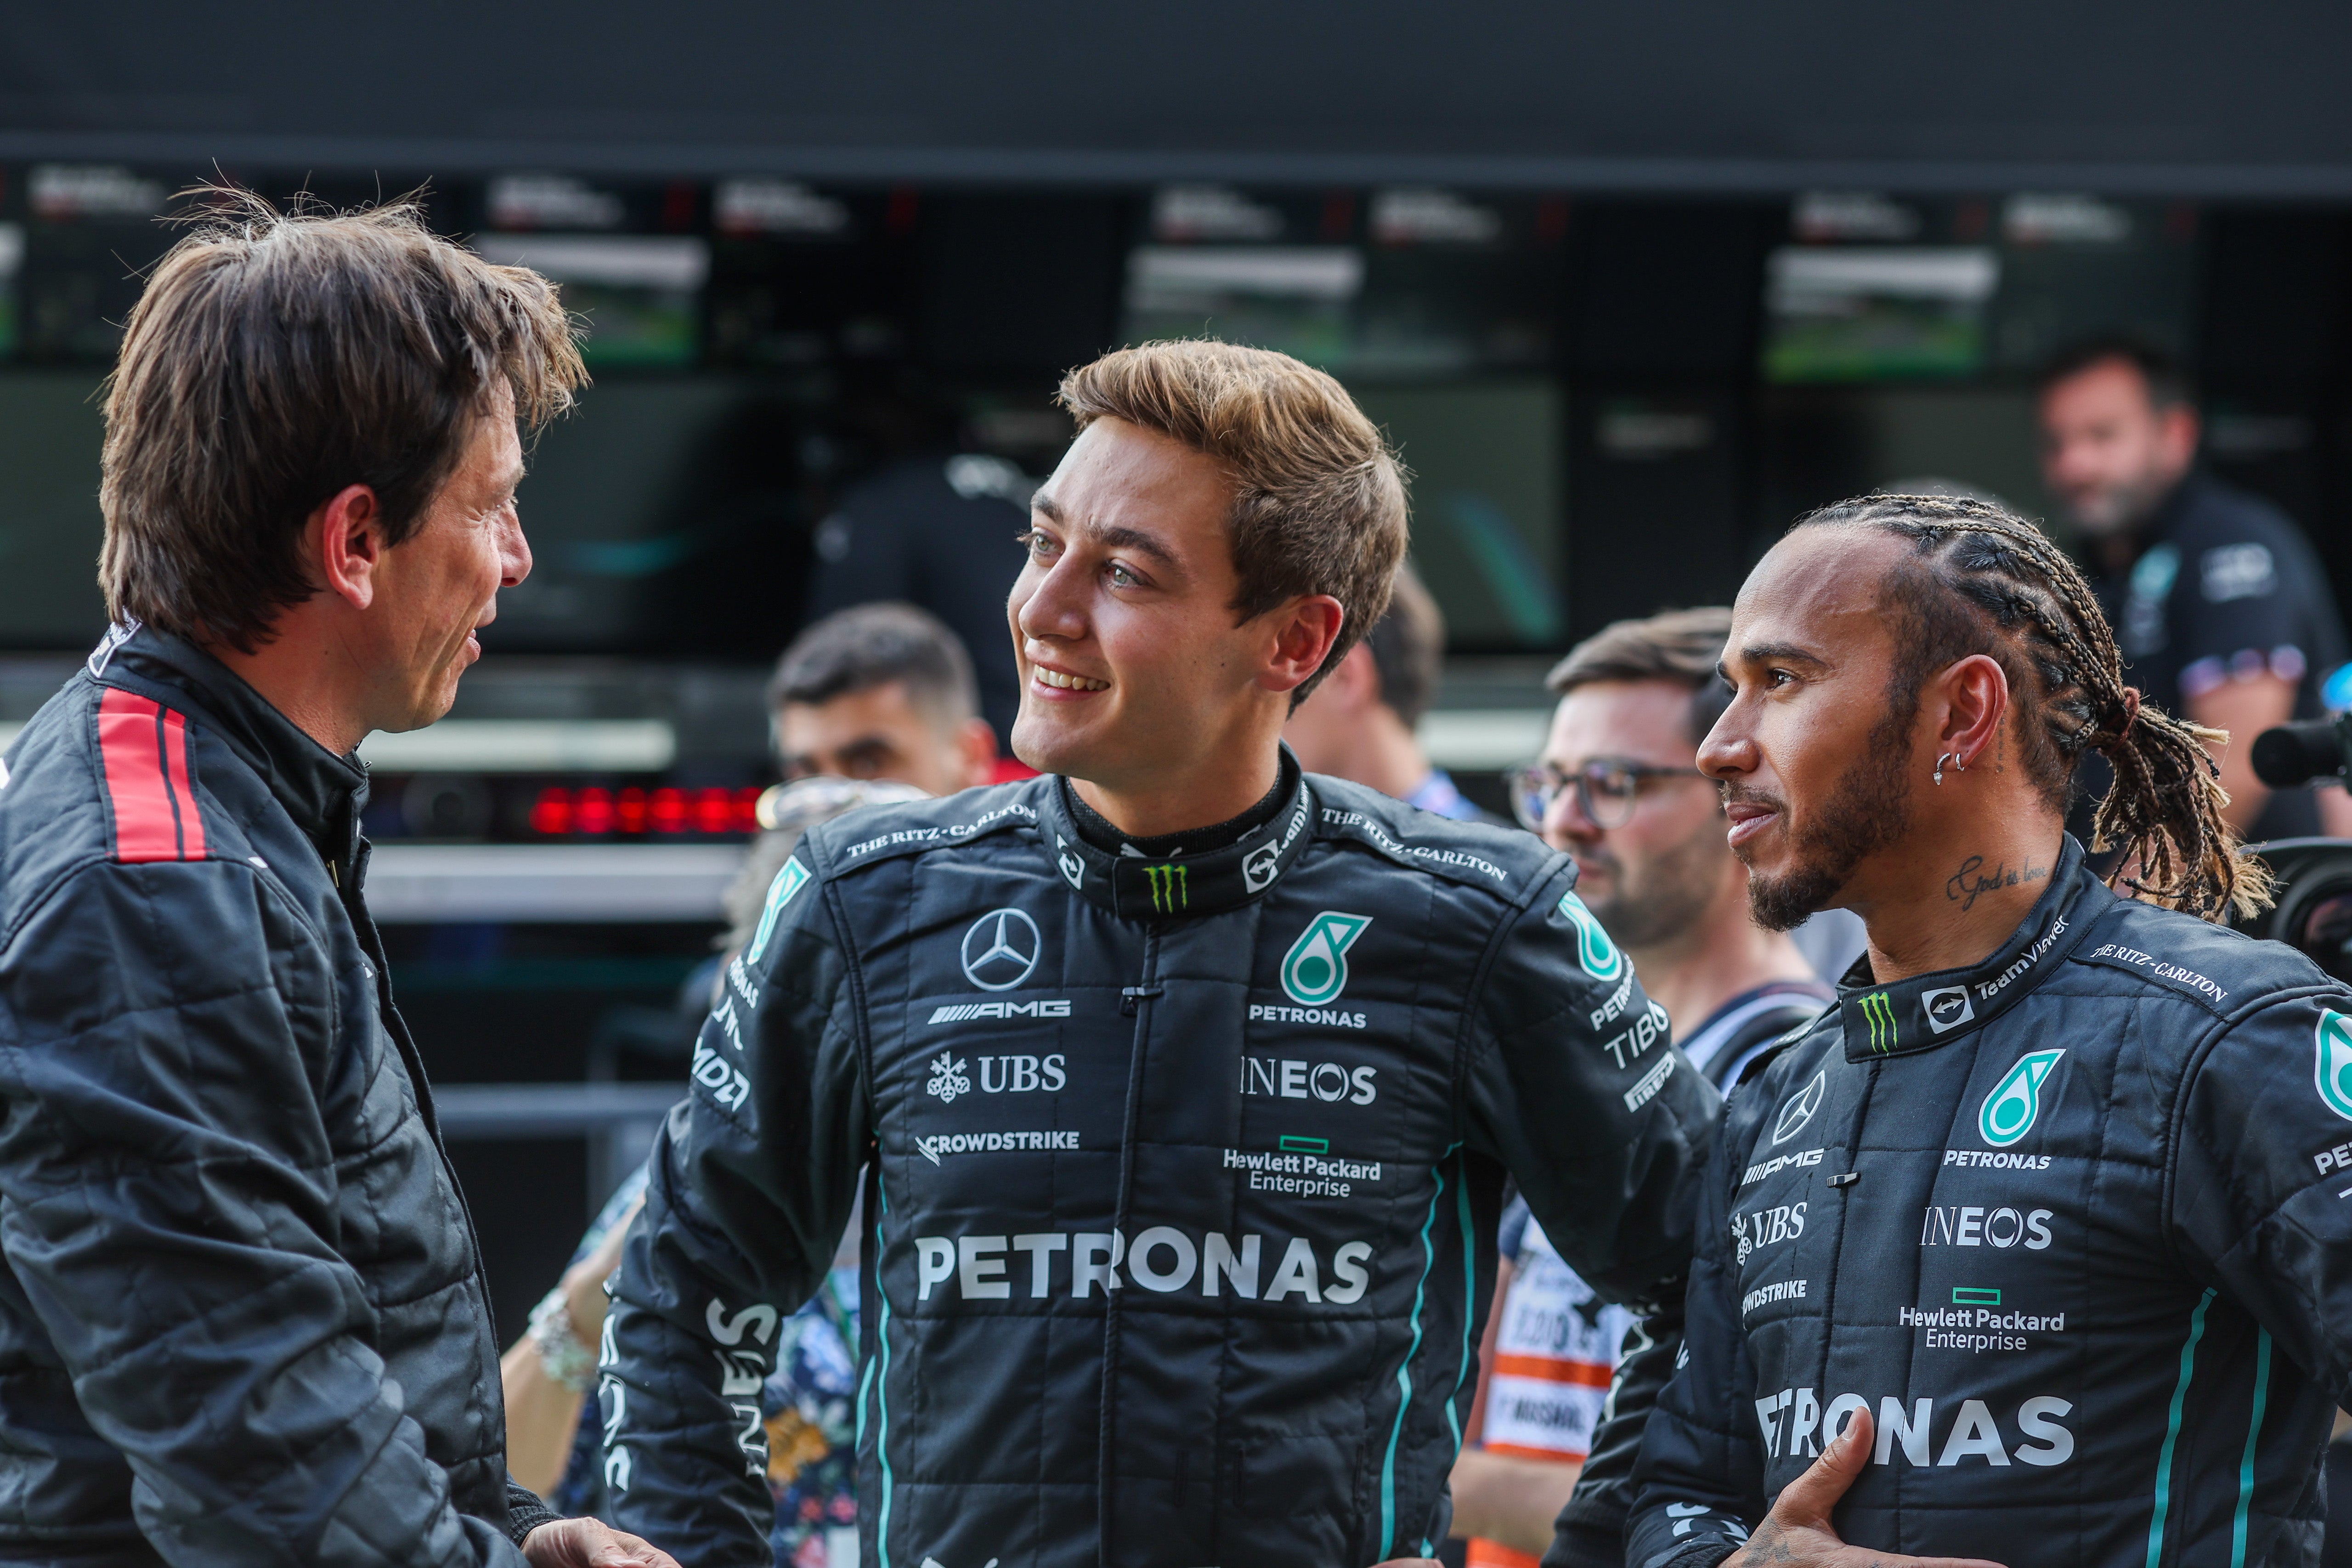 Toto Wolff described the all-British pairing as the ‘strongest on the grid’